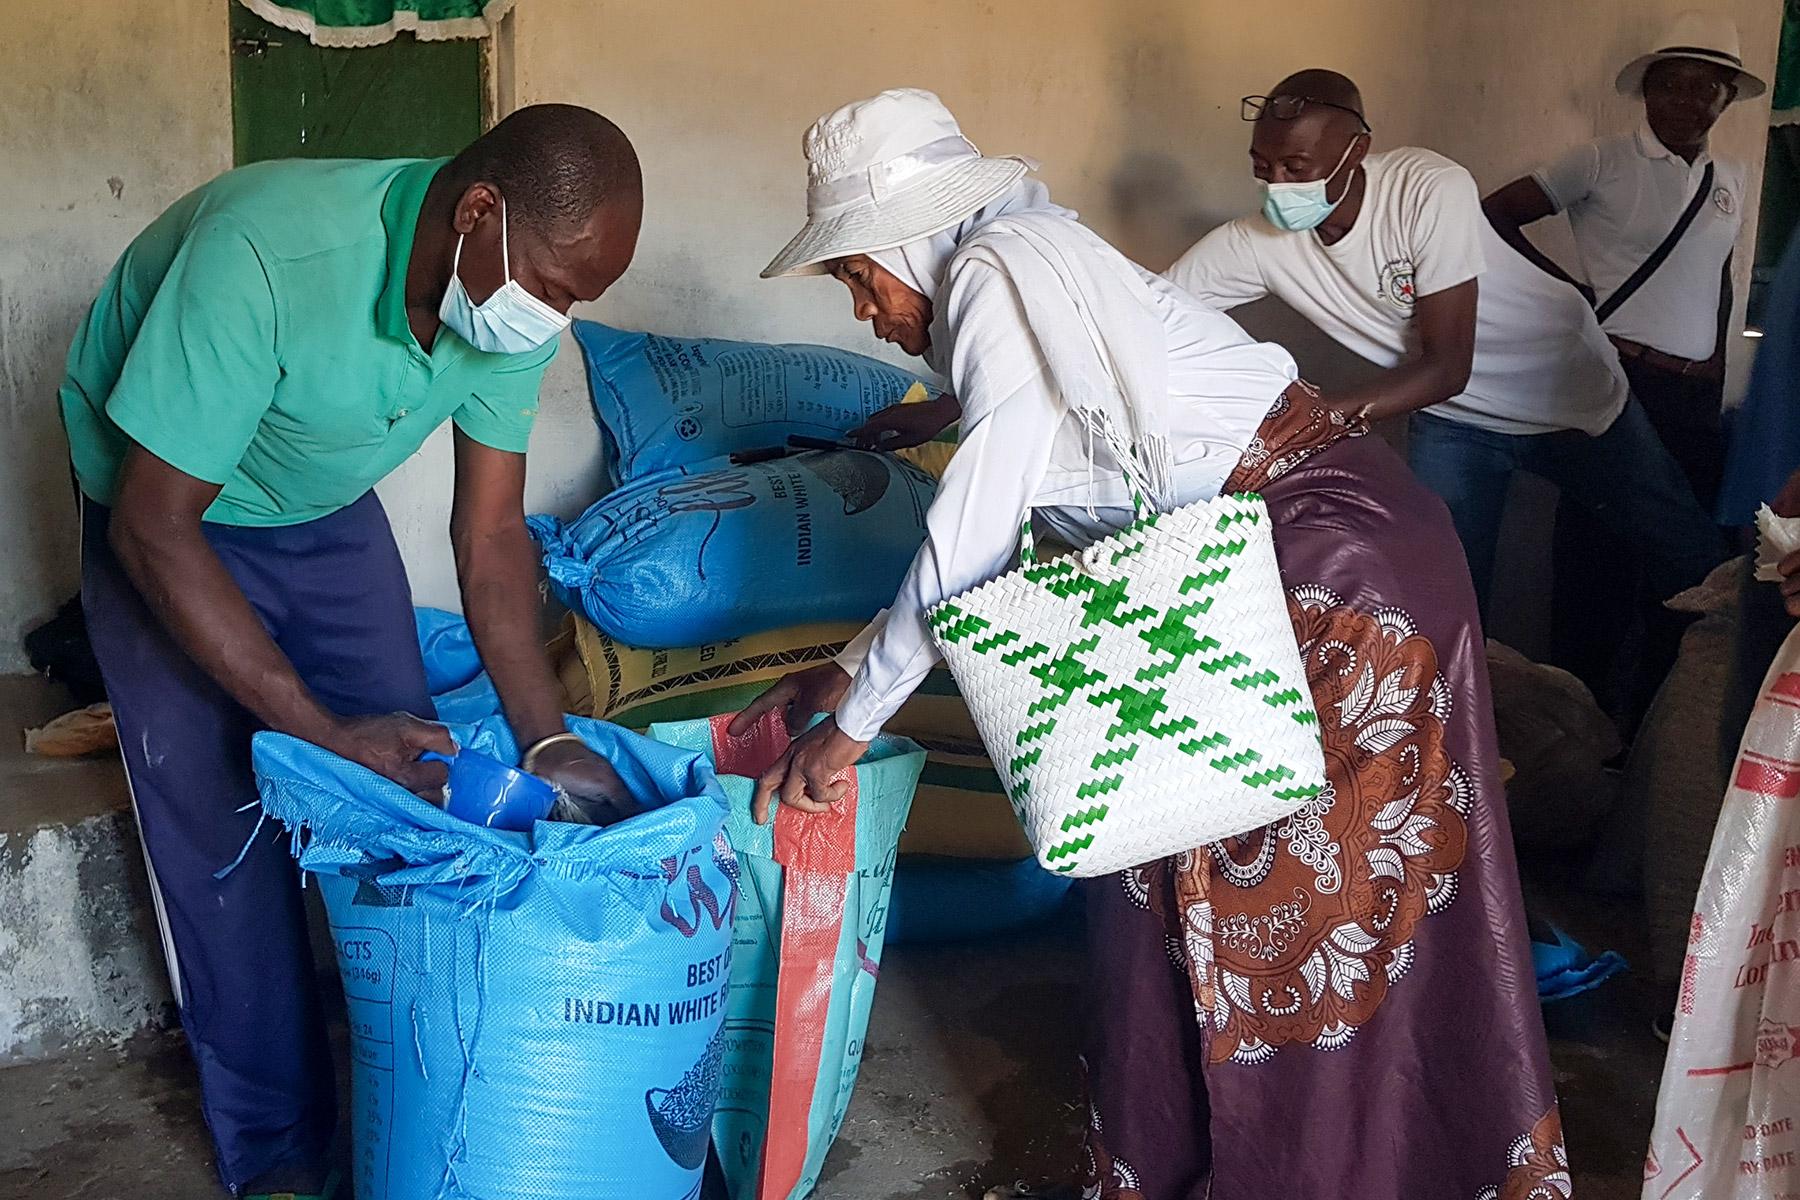 Malagasy Lutheran Church volunteers distribute food in Toliary synod, in the countryâs drought-hit southern region. The Evangelical Church of the Augsburg Confession in the Slovak Republic provided funding for the project. Photo: MLC